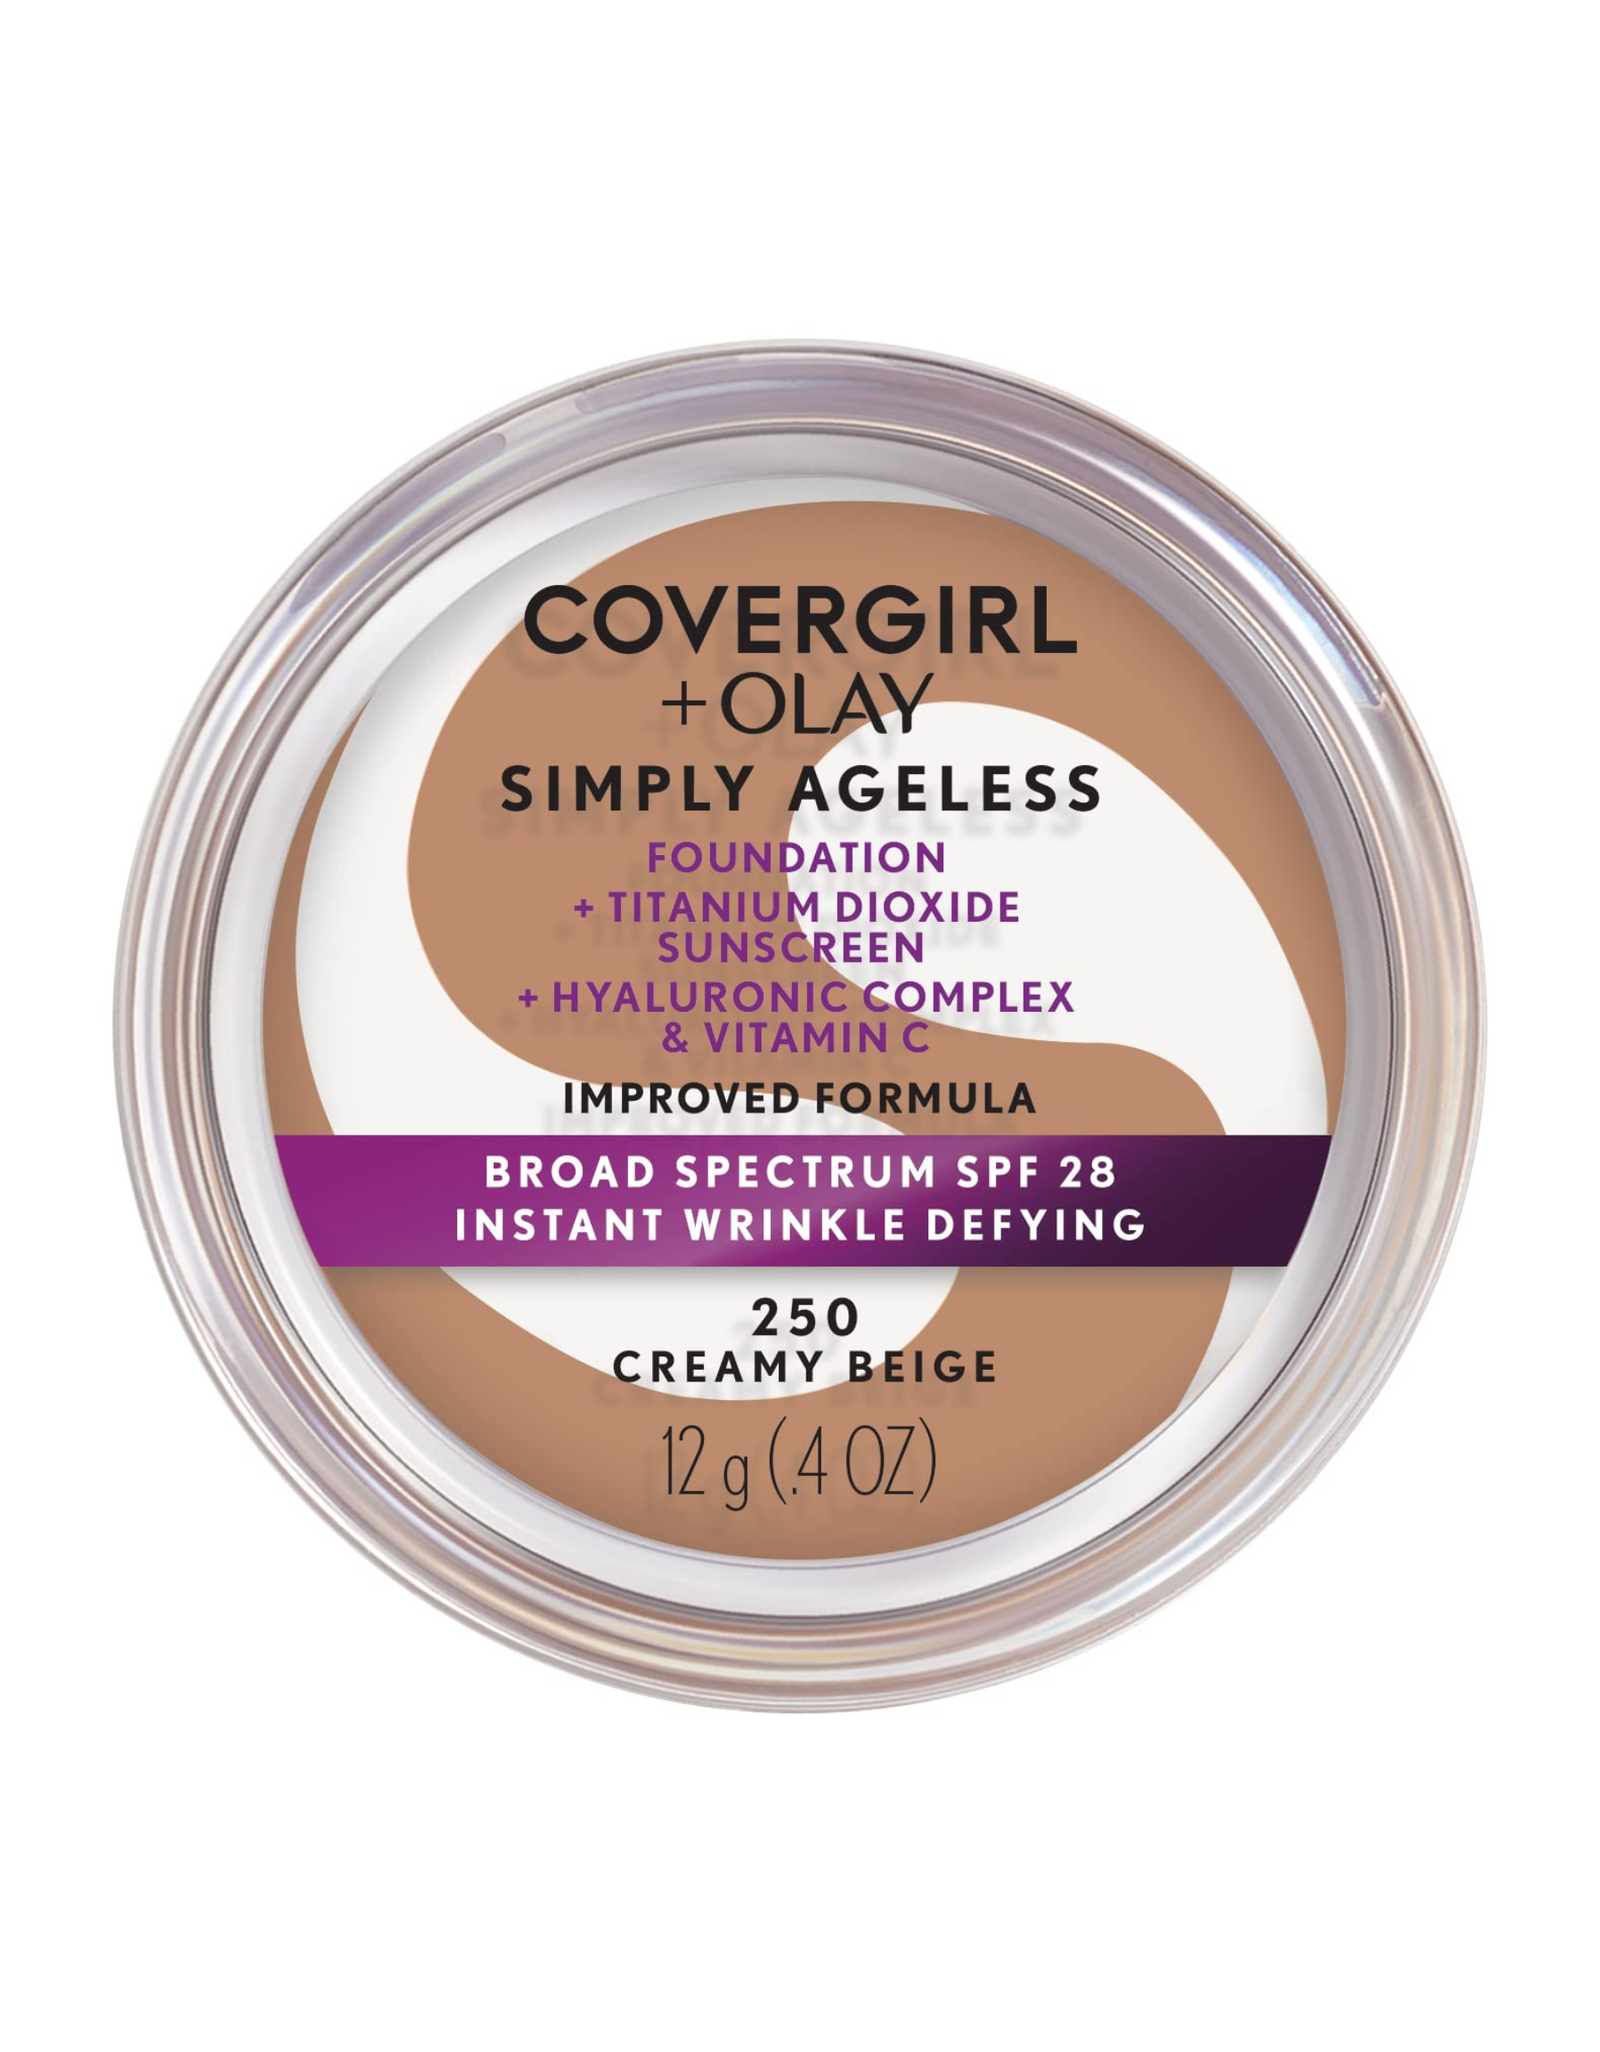 COVERGIRL & Olay Simply Ageless Foundation with Broad Spectrum SPF 28, Creamy Beige, 0.44 oz